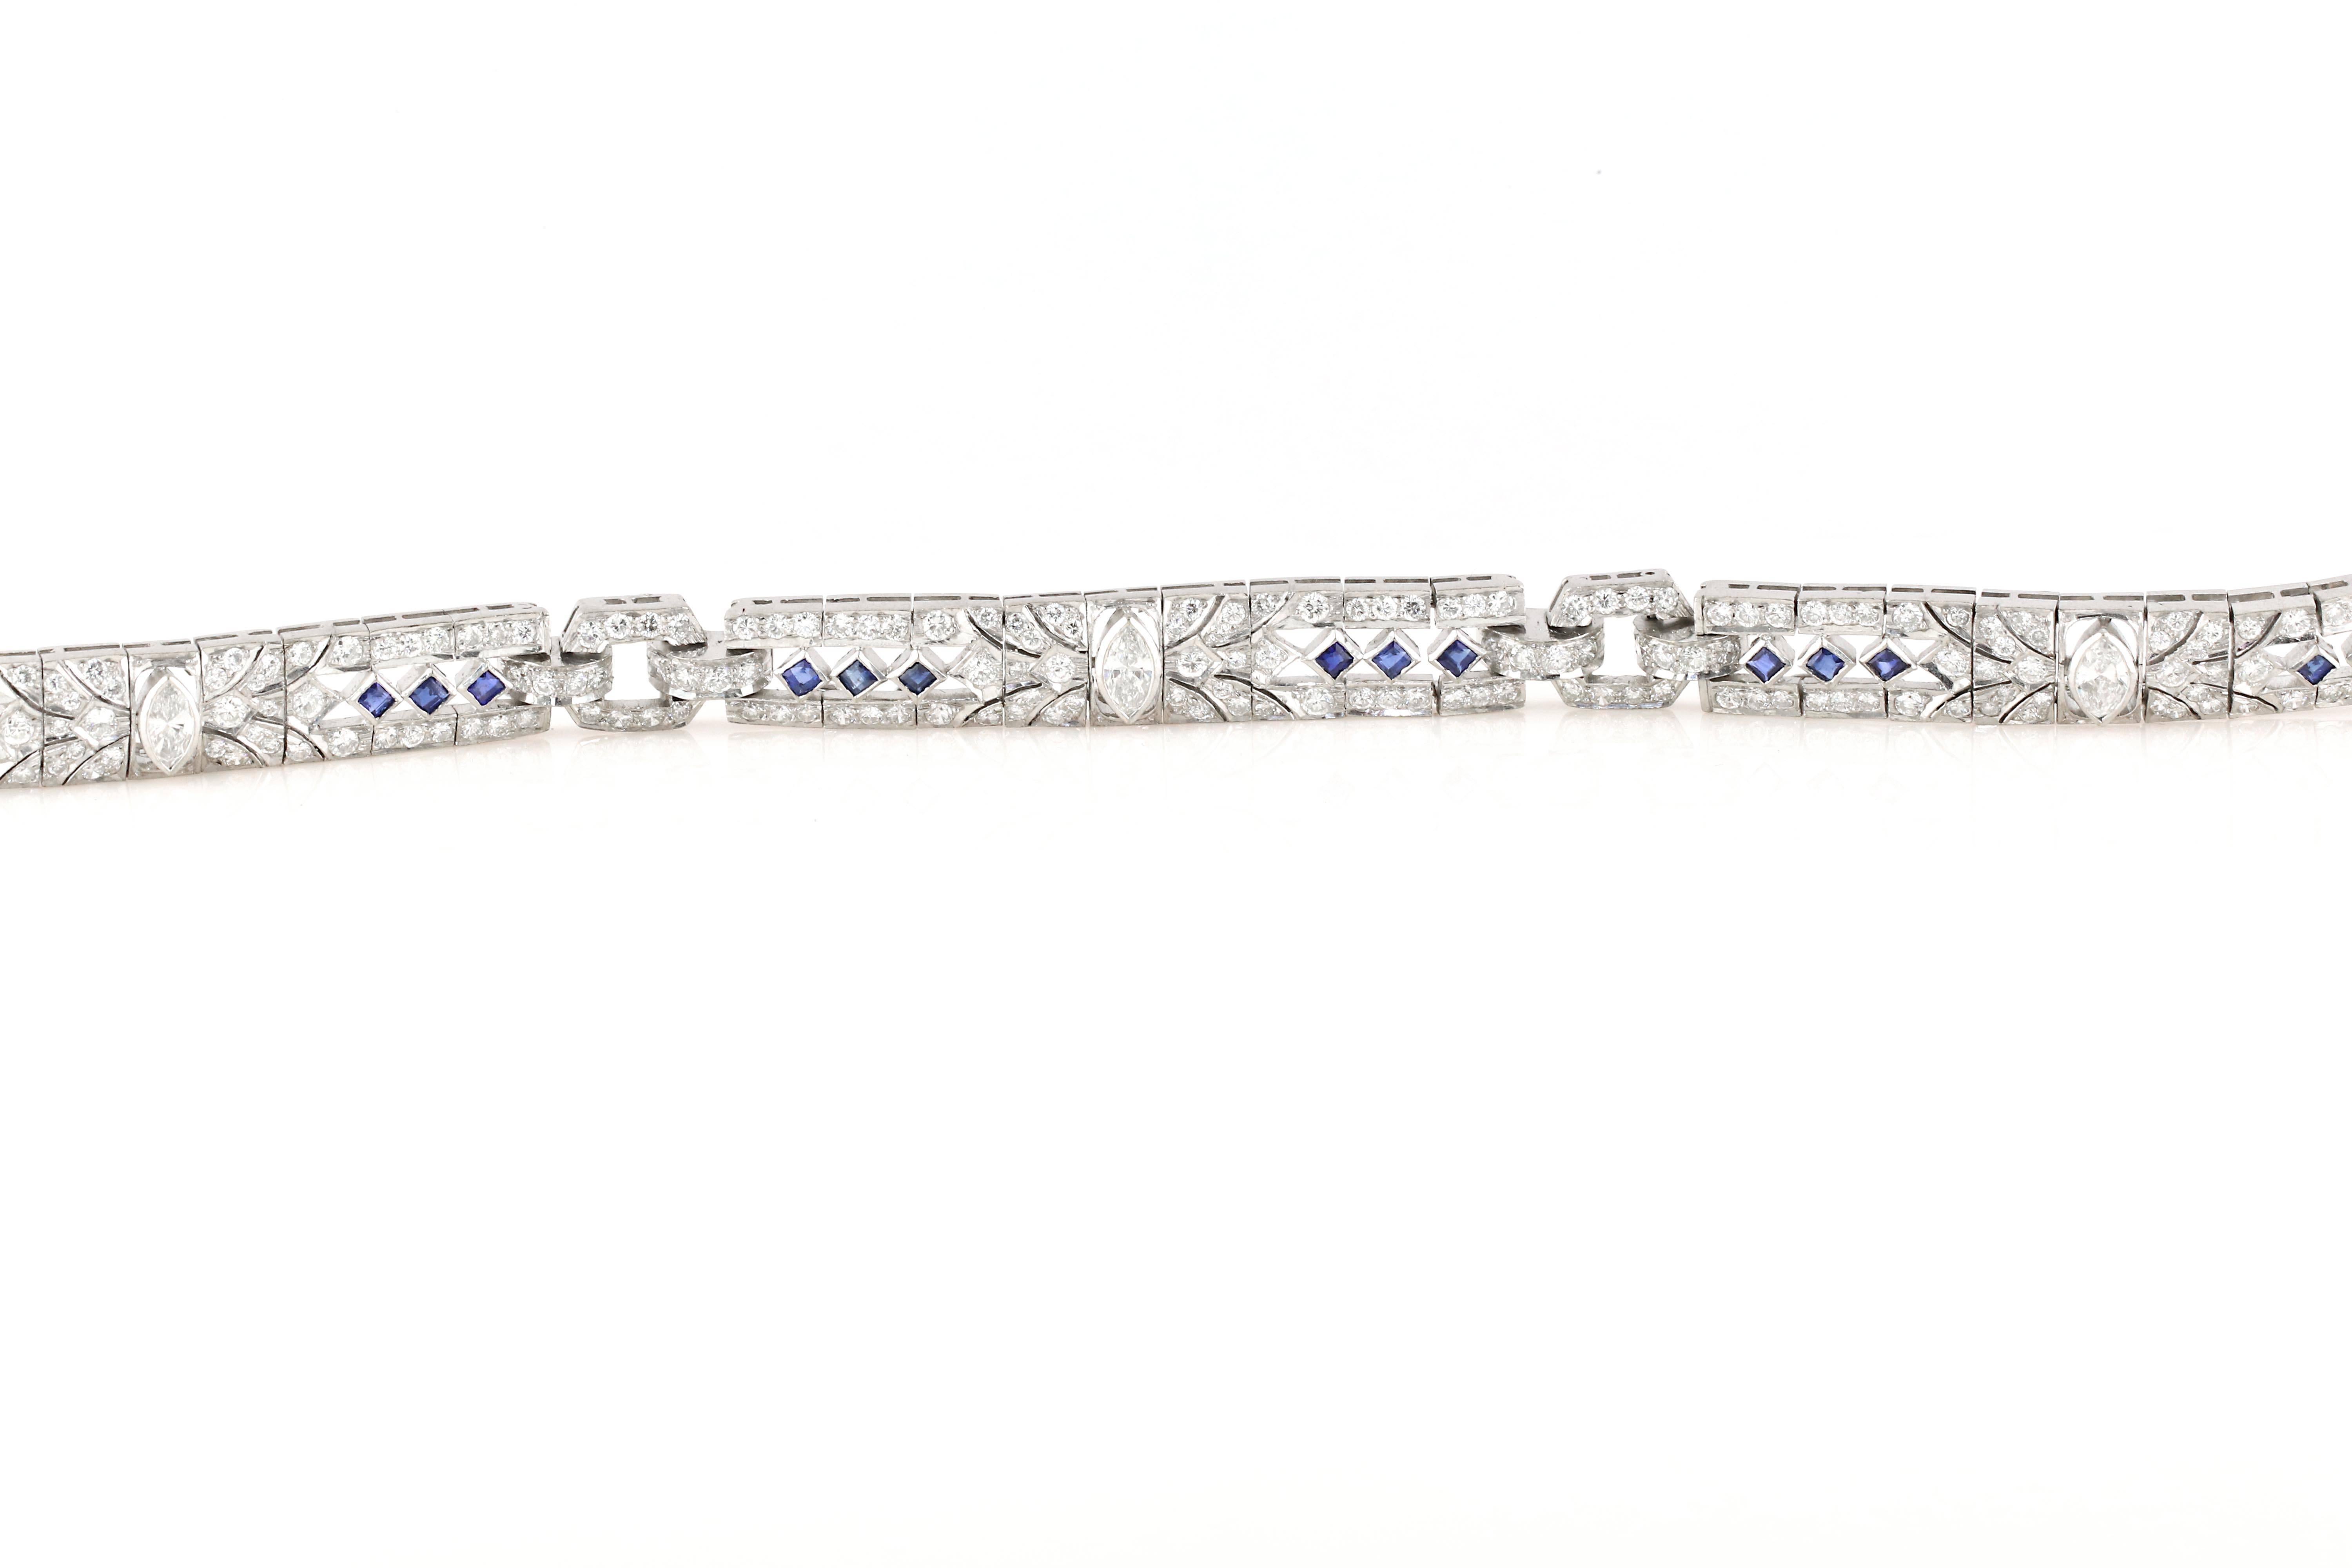 Get the look of art deco, without the premium price. This exquisite replica bracelet is set with diamonds and sapphires throughout. It is also set in 18kt white gold, not 14kt making it a much more premium piece. The sapphire are all Asscher/Square